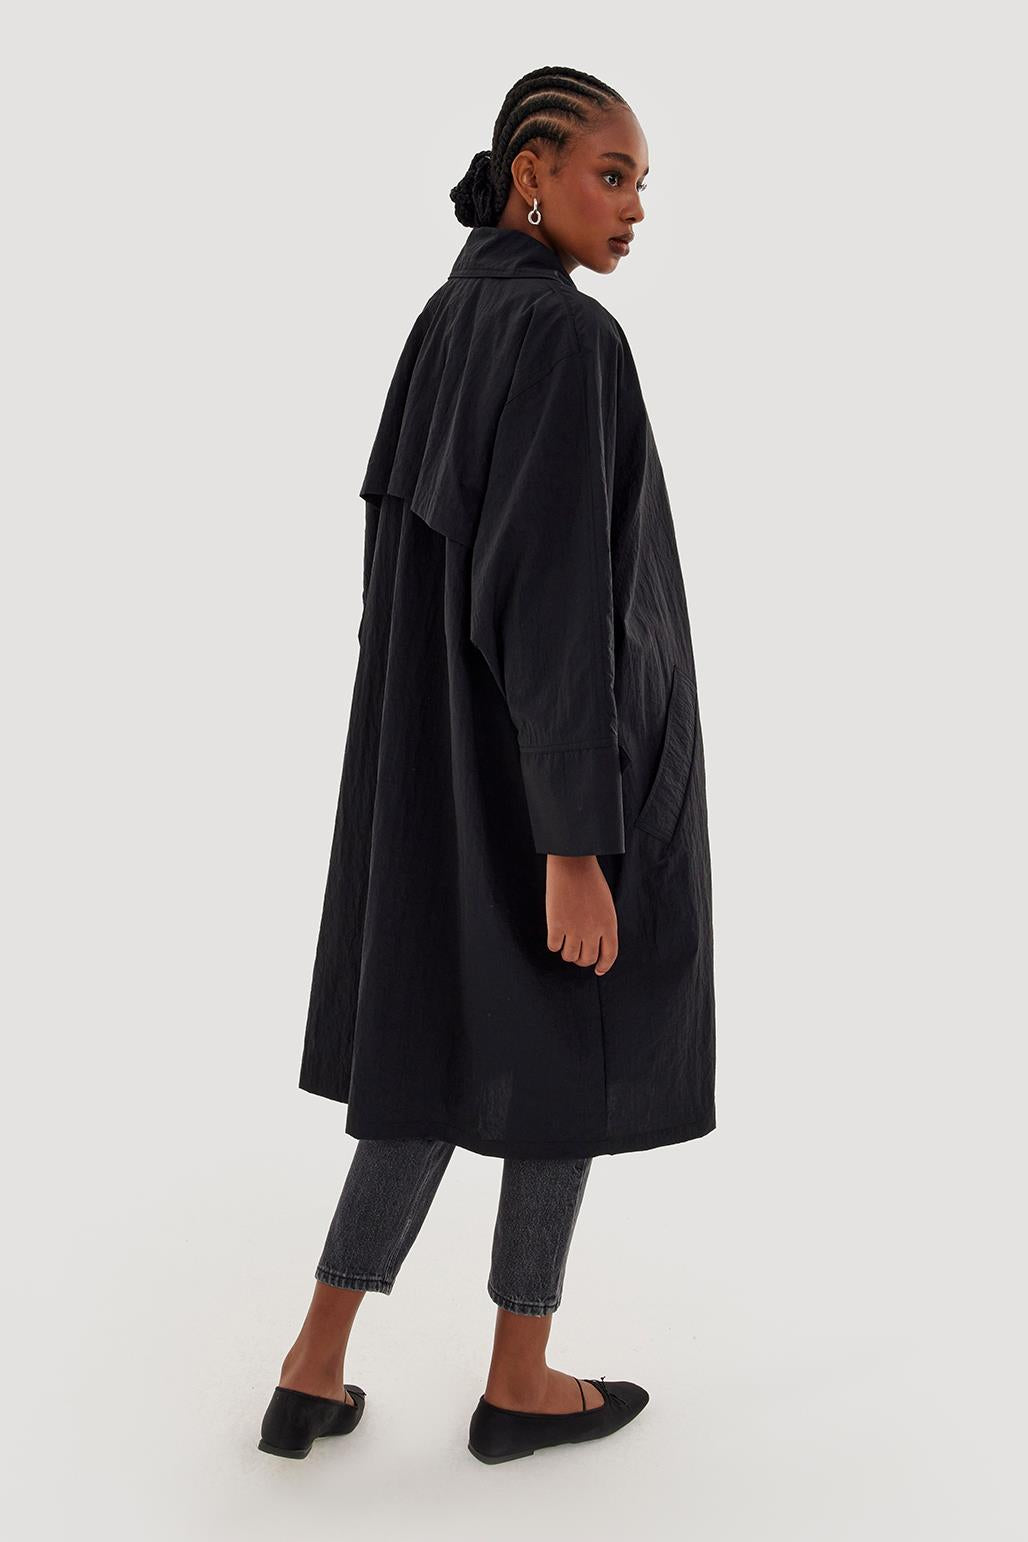 Draped Embroidered Trench Black